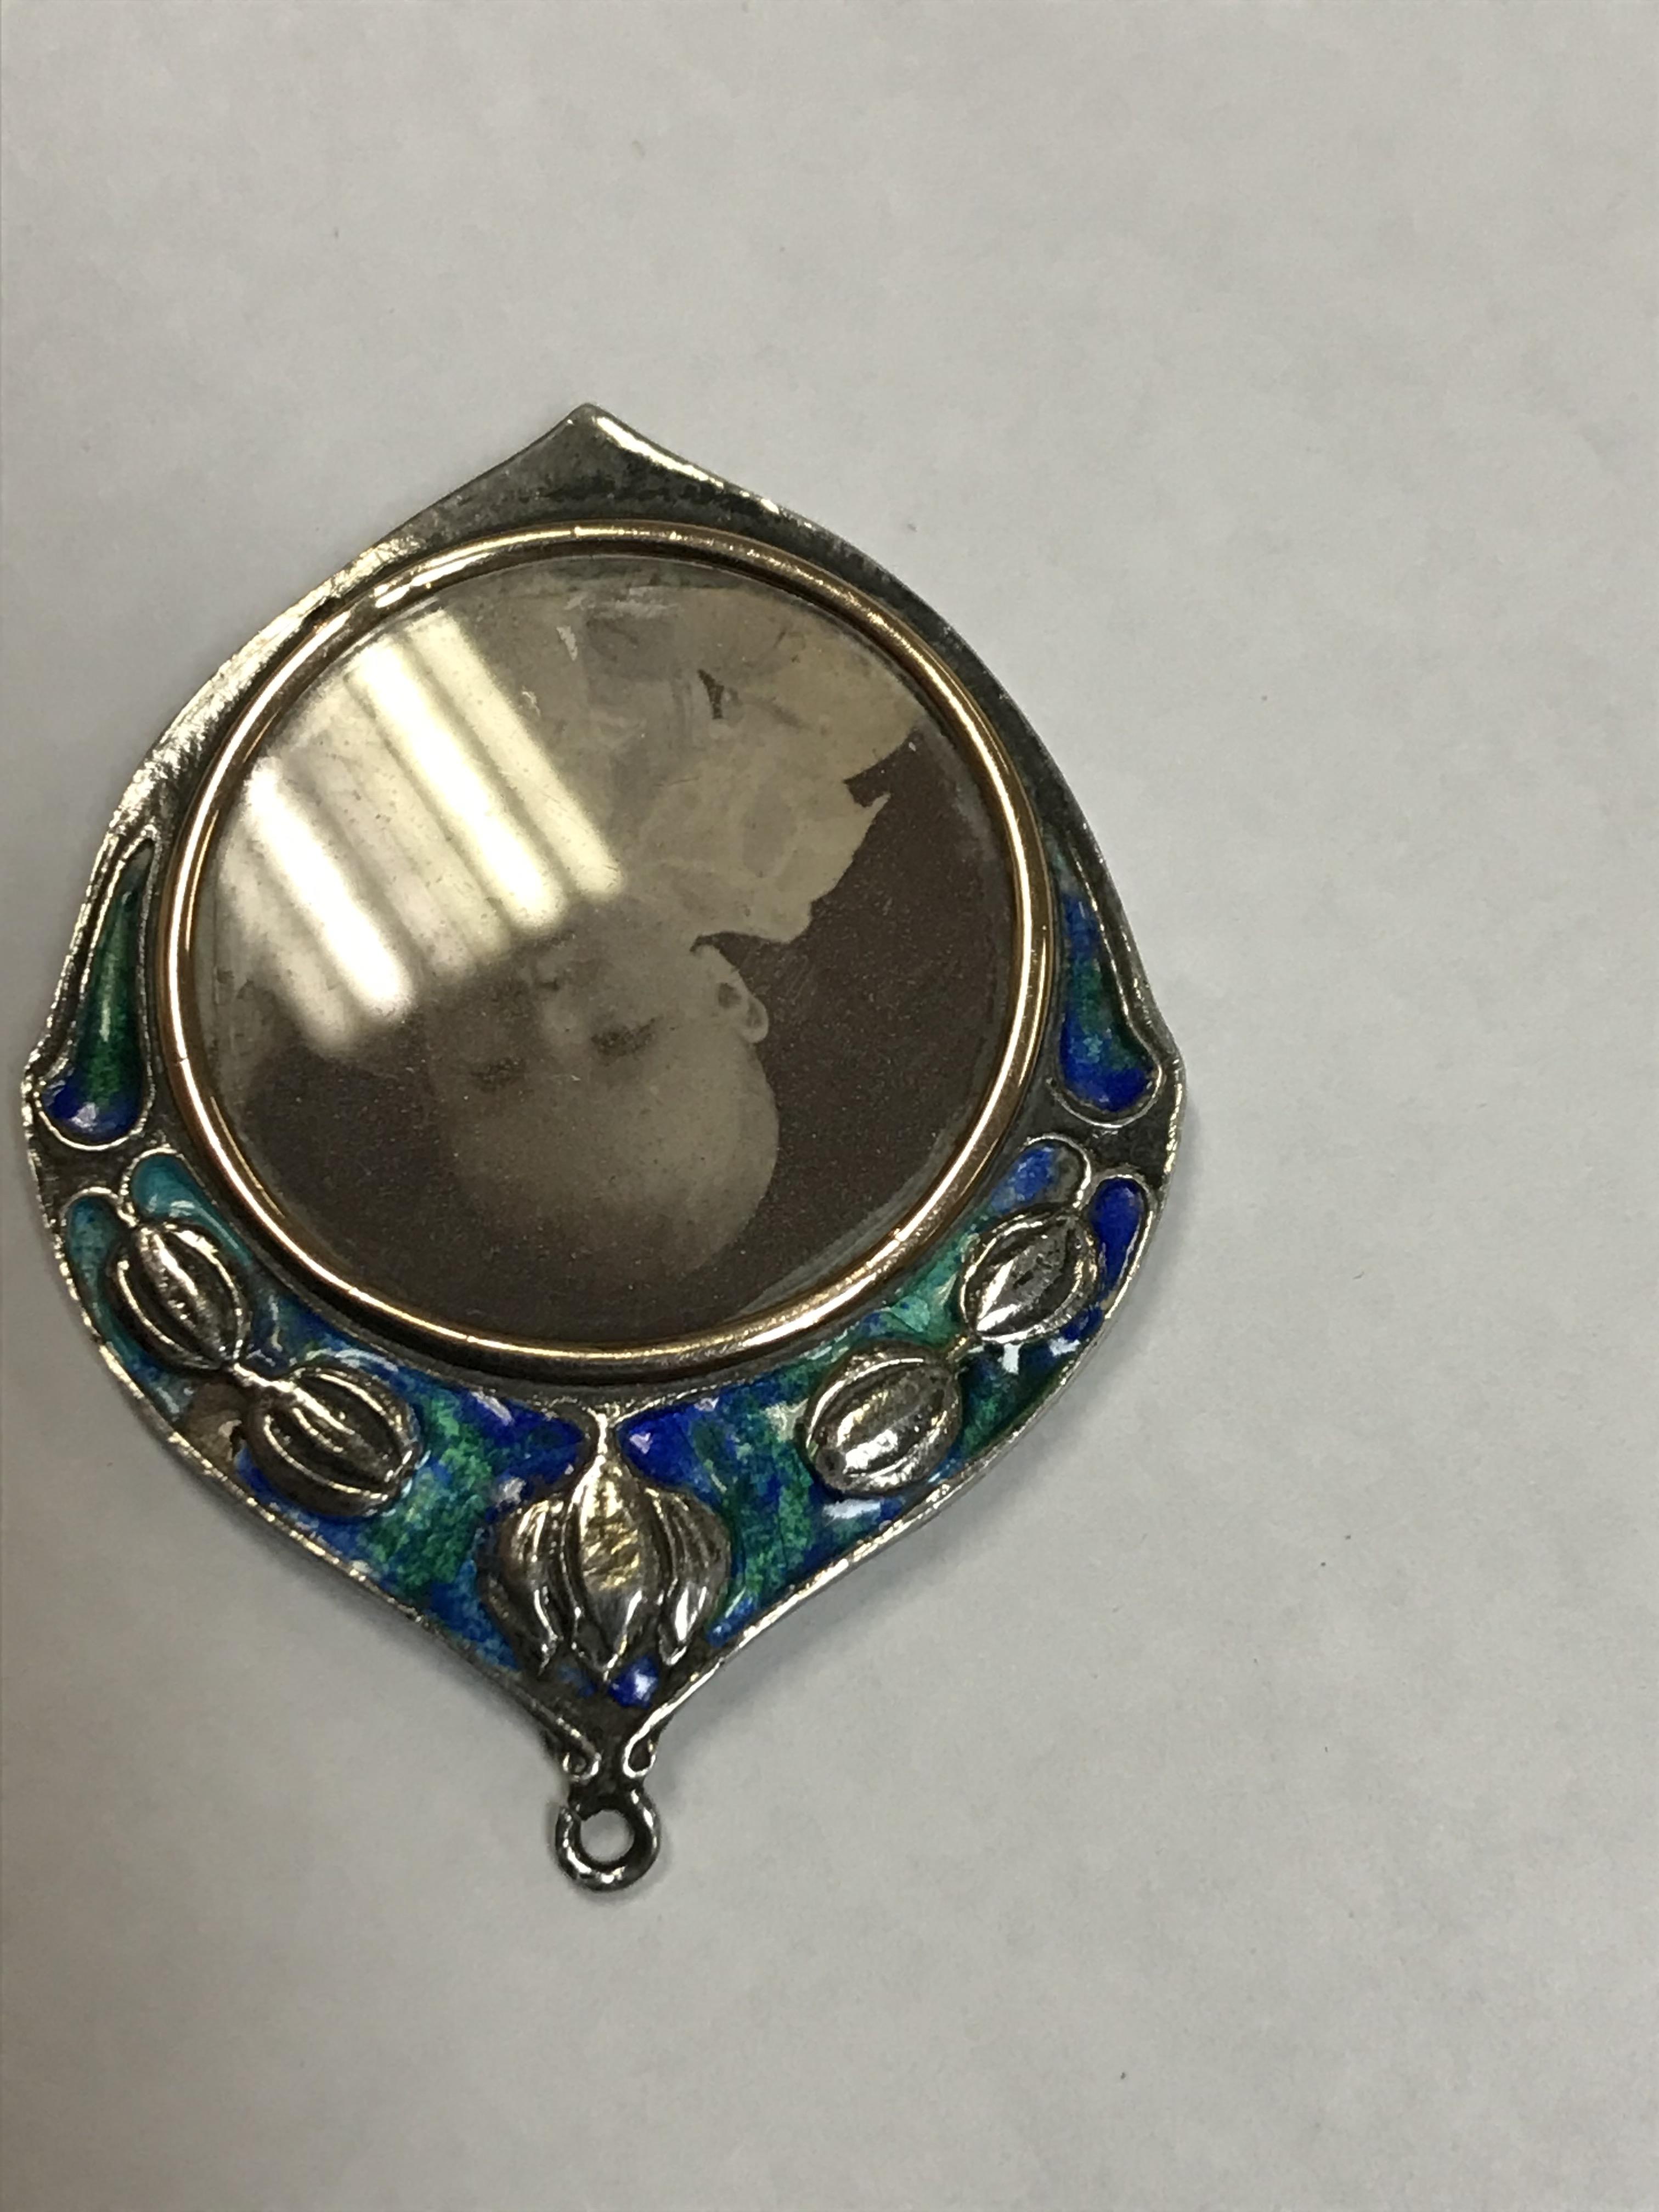 An Edwardian silver and enamel decorated pendant set with pendant locket (by William Hair Haseler, - Image 10 of 11